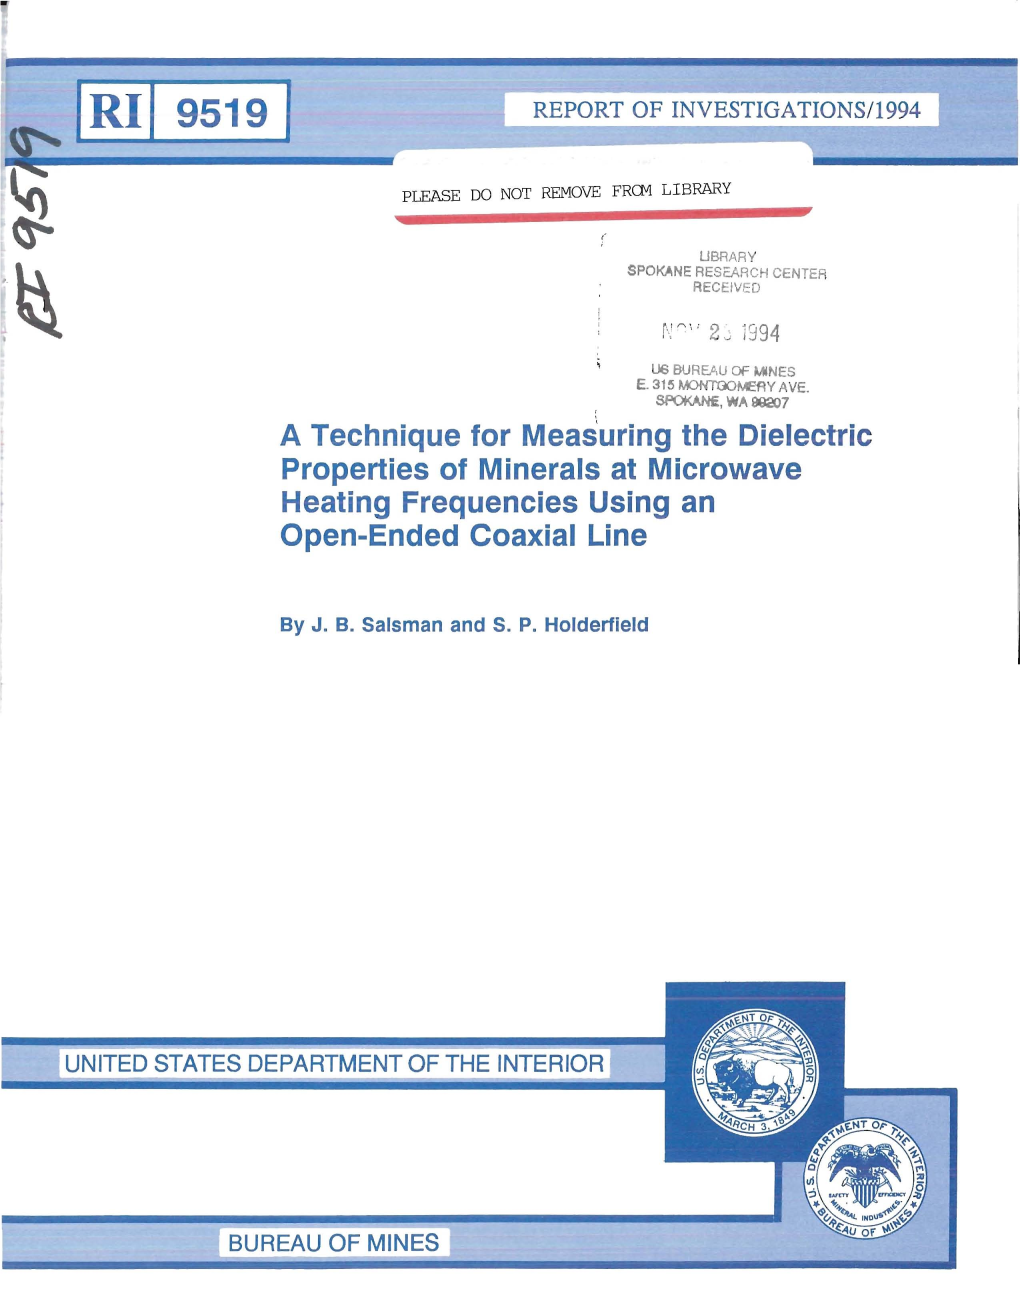 A Technique for Measuring the Dielectric Properties of Minerals at Microwave Heating Frequencies Using an Open-Ended Coaxial Line